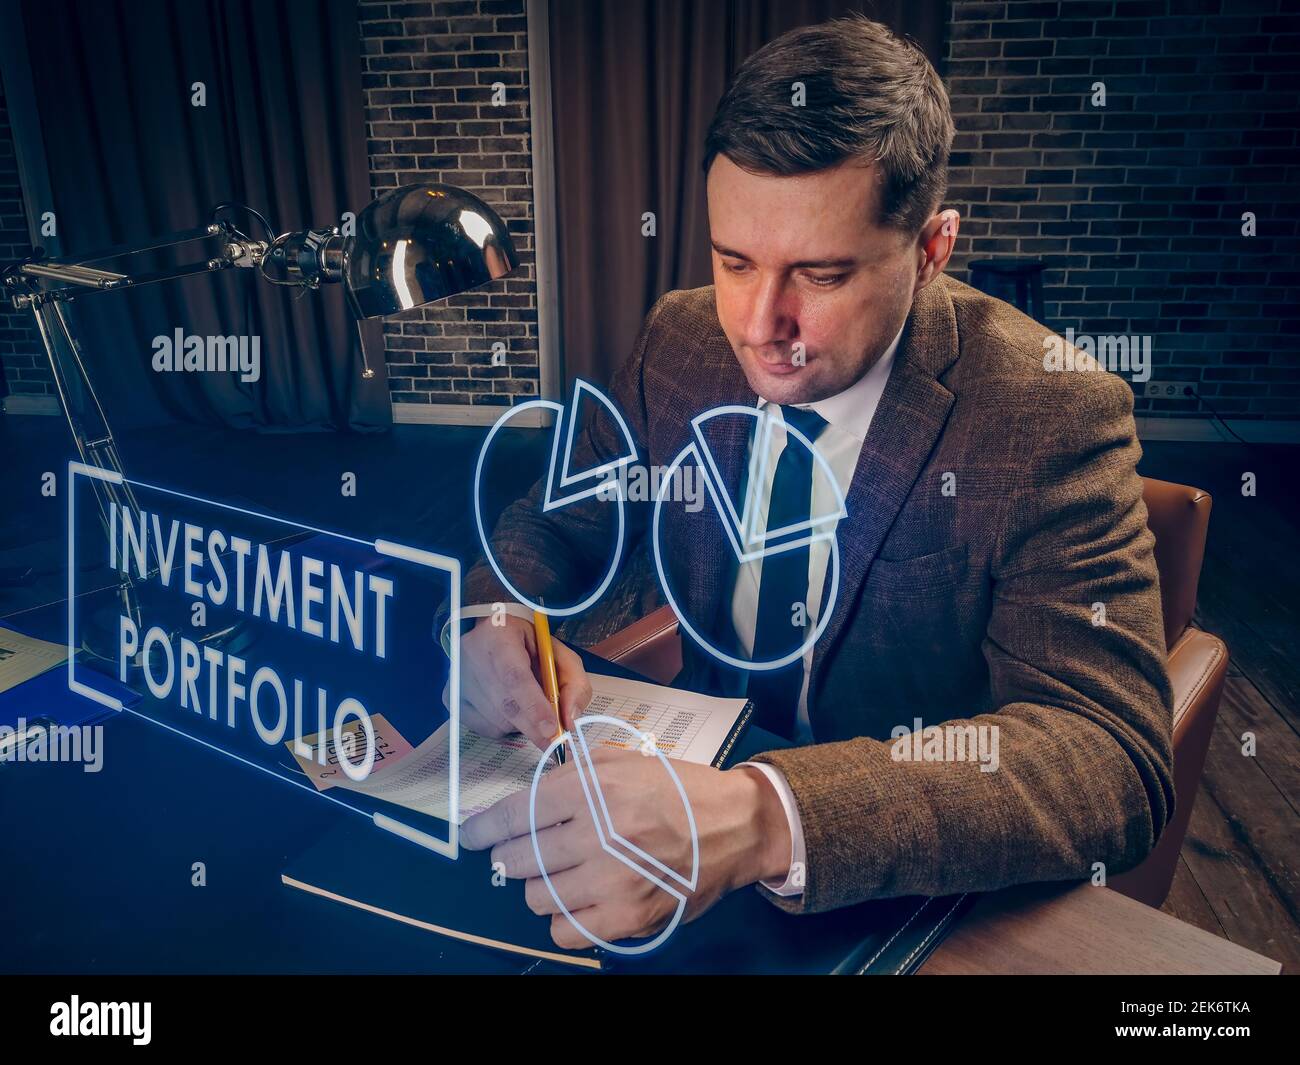 Manager and investment portfolio management info in the office. Stock Photo